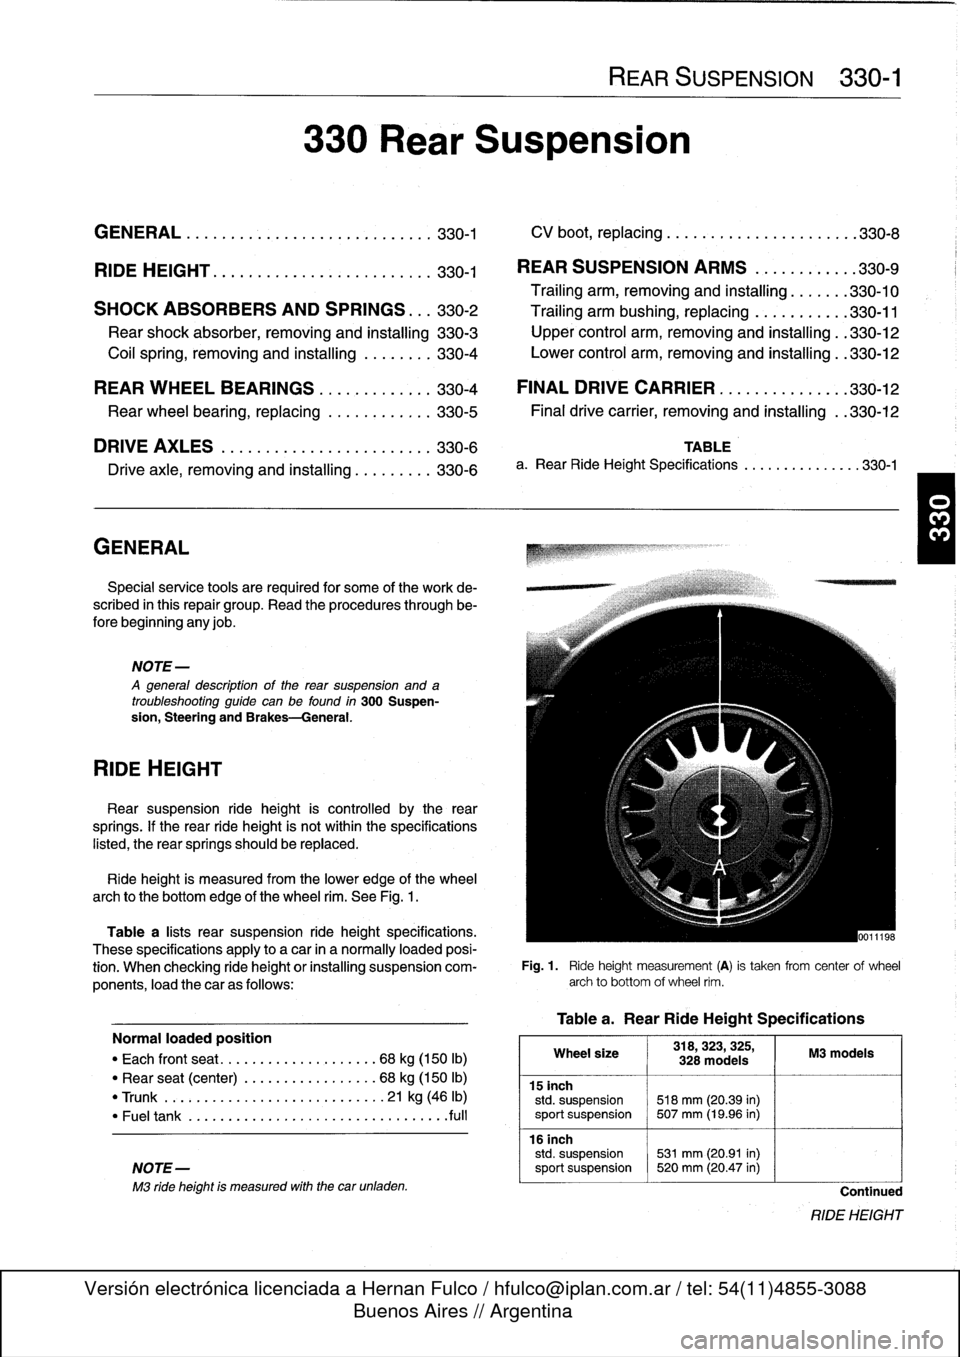 BMW 323i 1998 E36 Workshop Manual 
GENERAL
.......
.
.
.
.
.
.
.
.
.
.......
.
...
.330-1

	

CV
boot,
replacing
........
.
.
.
.........
.
.330-8

RIDE
HEIGHT
....
.
.
.
.
.
...
.
...
.
.
.
.
.
...
.
330-1

	

REAR
SUSPENSION
ARMS
.
